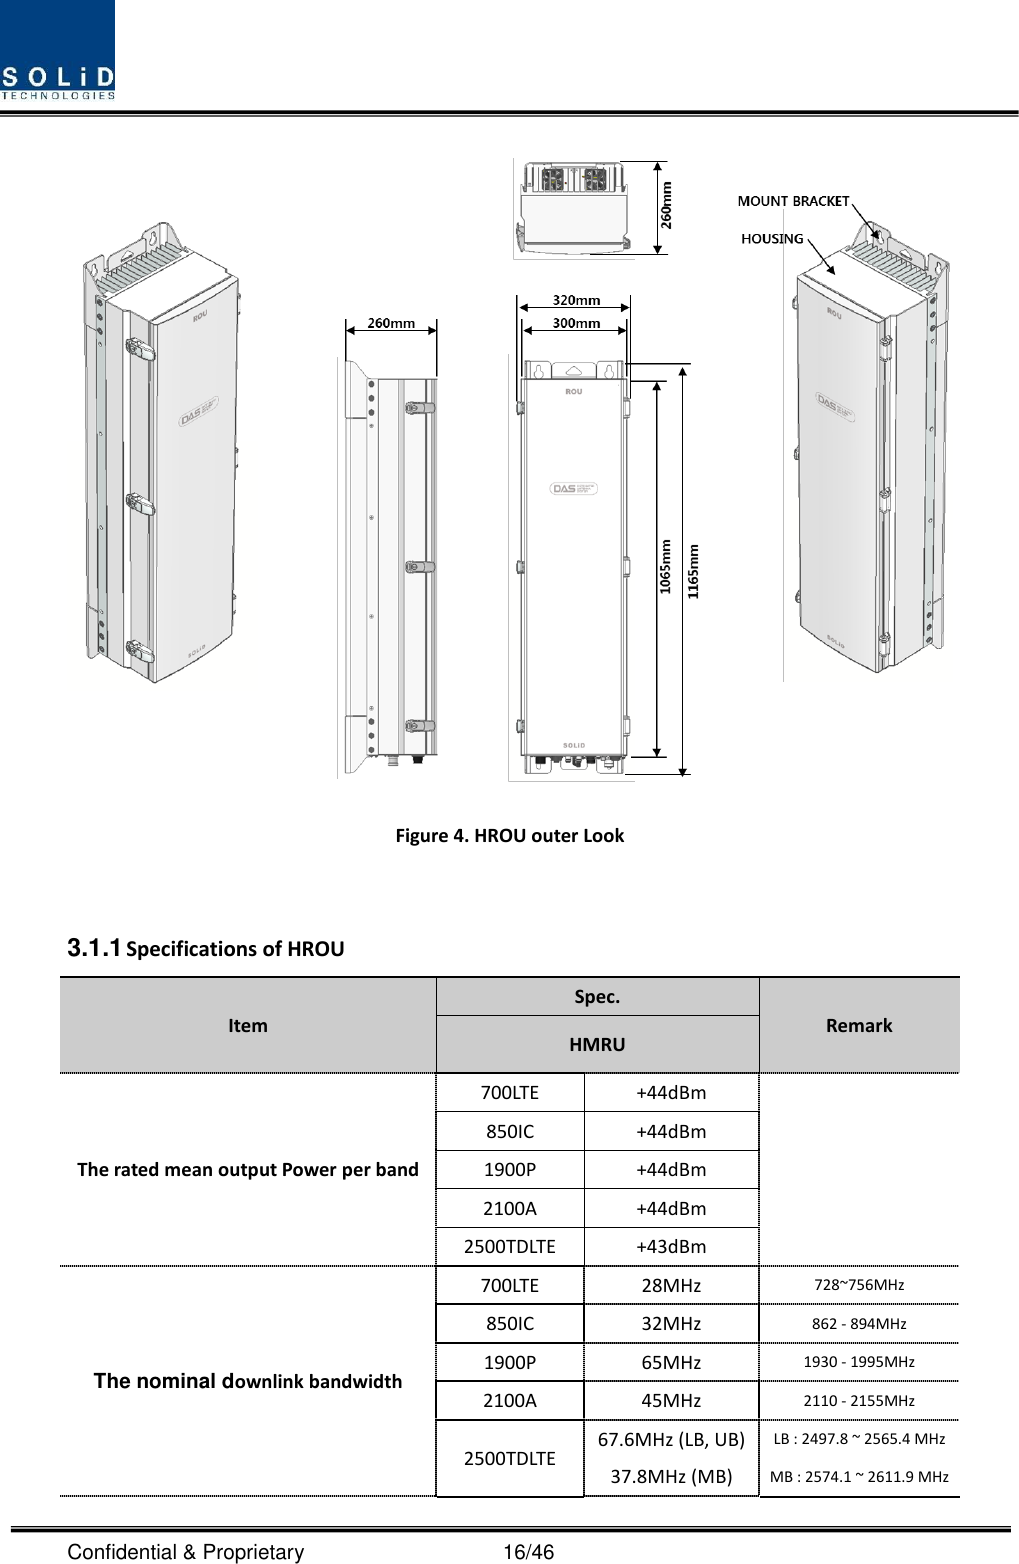  Confidential &amp; Proprietary                                      16/46  Figure 4. HROU outer Look  3.1.1 Specifications of HROU Item Spec. Remark HMRU The rated mean output Power per band 700LTE +44dBm  850IC +44dBm 1900P +44dBm 2100A +44dBm 2500TDLTE +43dBm The nominal downlink bandwidth 700LTE 28MHz 728~756MHz 850IC 32MHz 862 - 894MHz 1900P 65MHz 1930 - 1995MHz 2100A 45MHz 2110 - 2155MHz   2500TDLTE 67.6MHz (LB, UB) 37.8MHz (MB) LB : 2497.8 ~ 2565.4 MHz MB : 2574.1 ~ 2611.9 MHz  